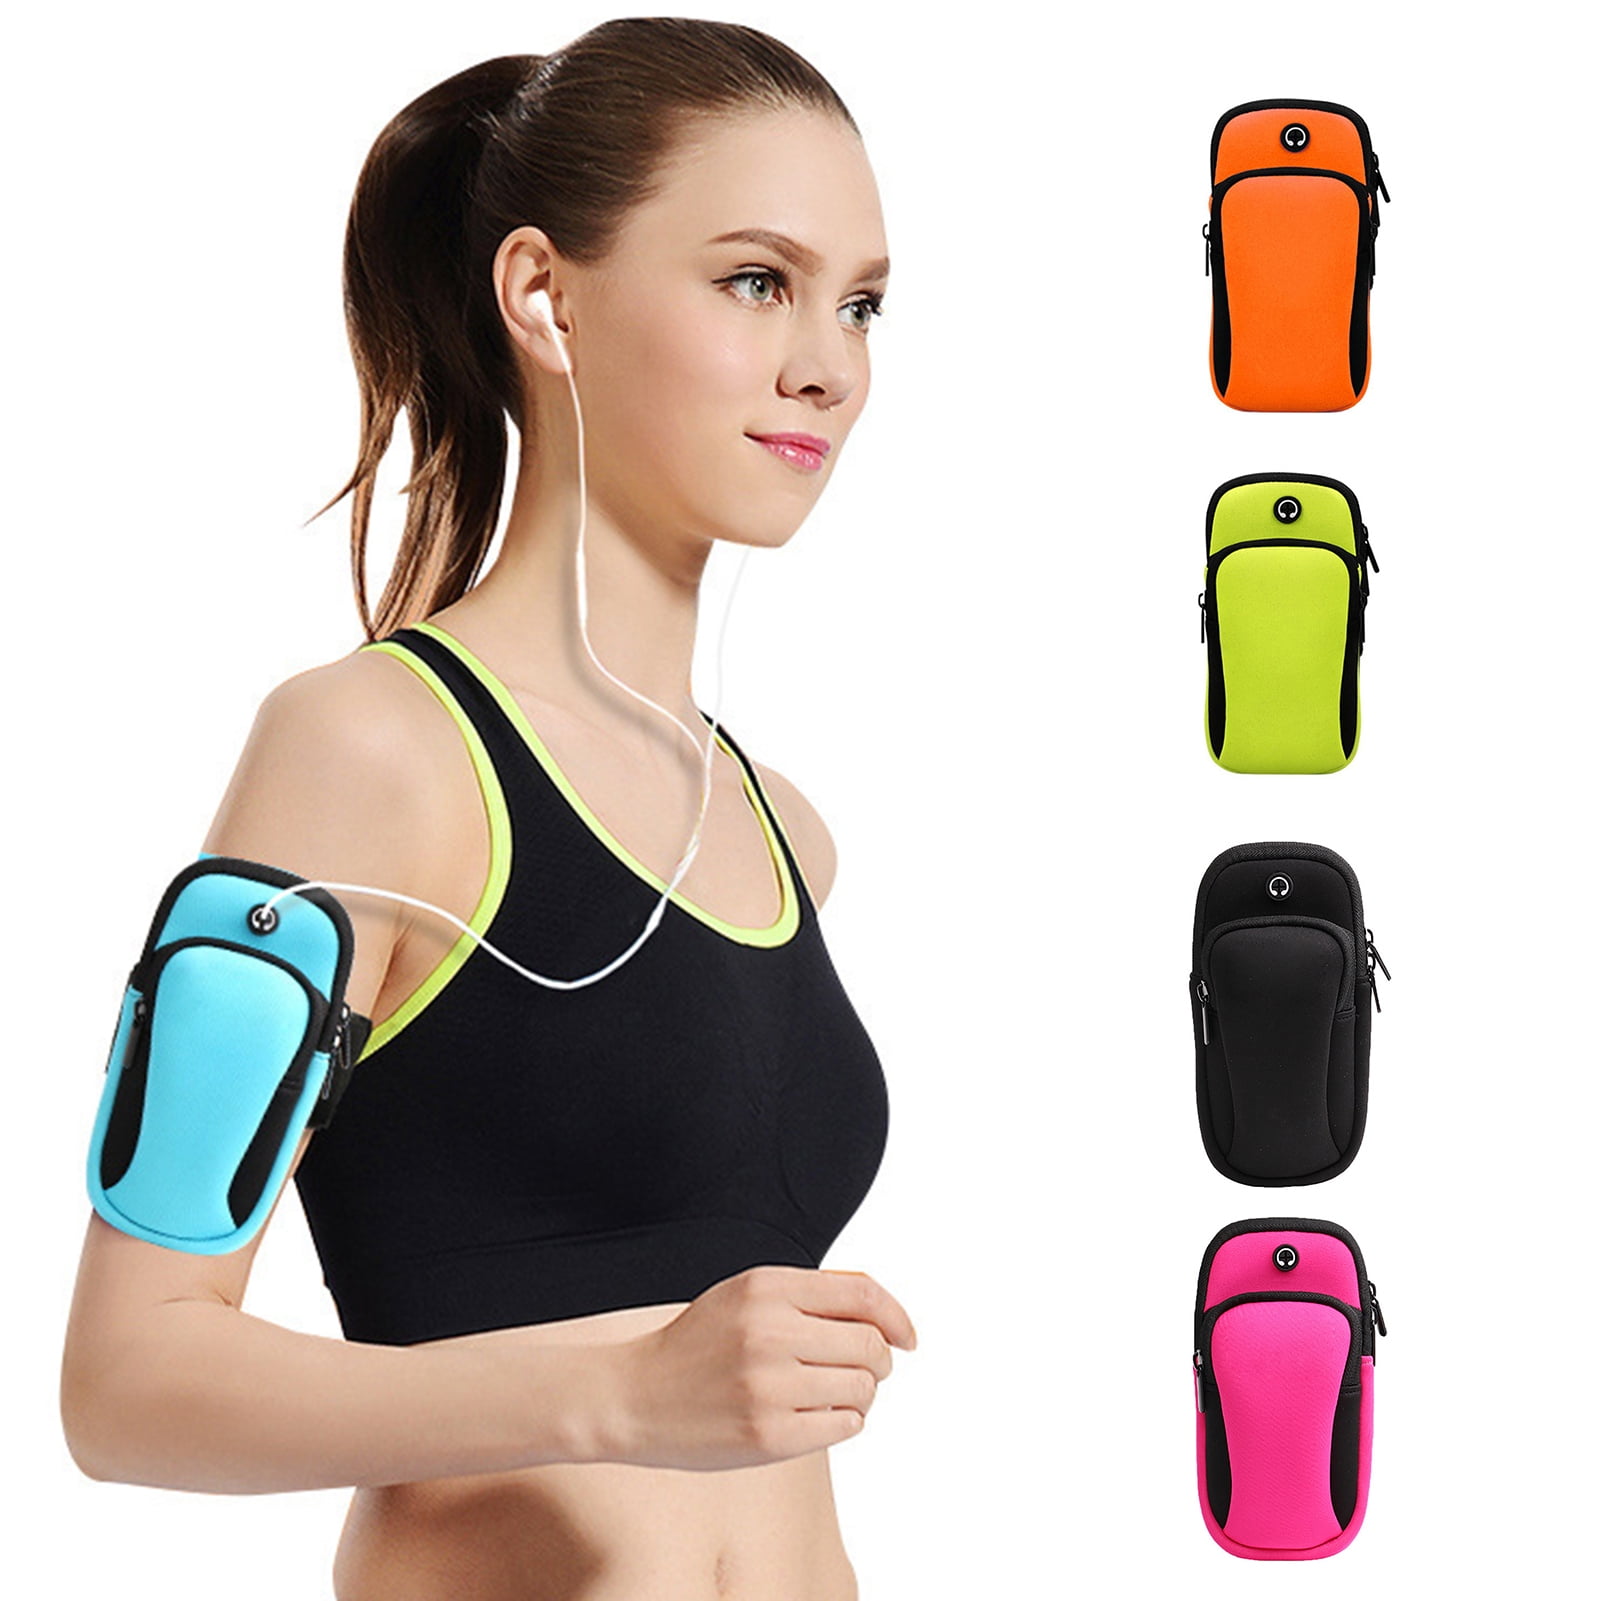 Unisex Outdoor Running Waterproof Wristbands Phone Armband Protector Sports Arm Bag Fitness Gym Cycling Breathable Smart Mobile Light Weight Leg Pack with Earphone Hole for Under 5.5 Phone 